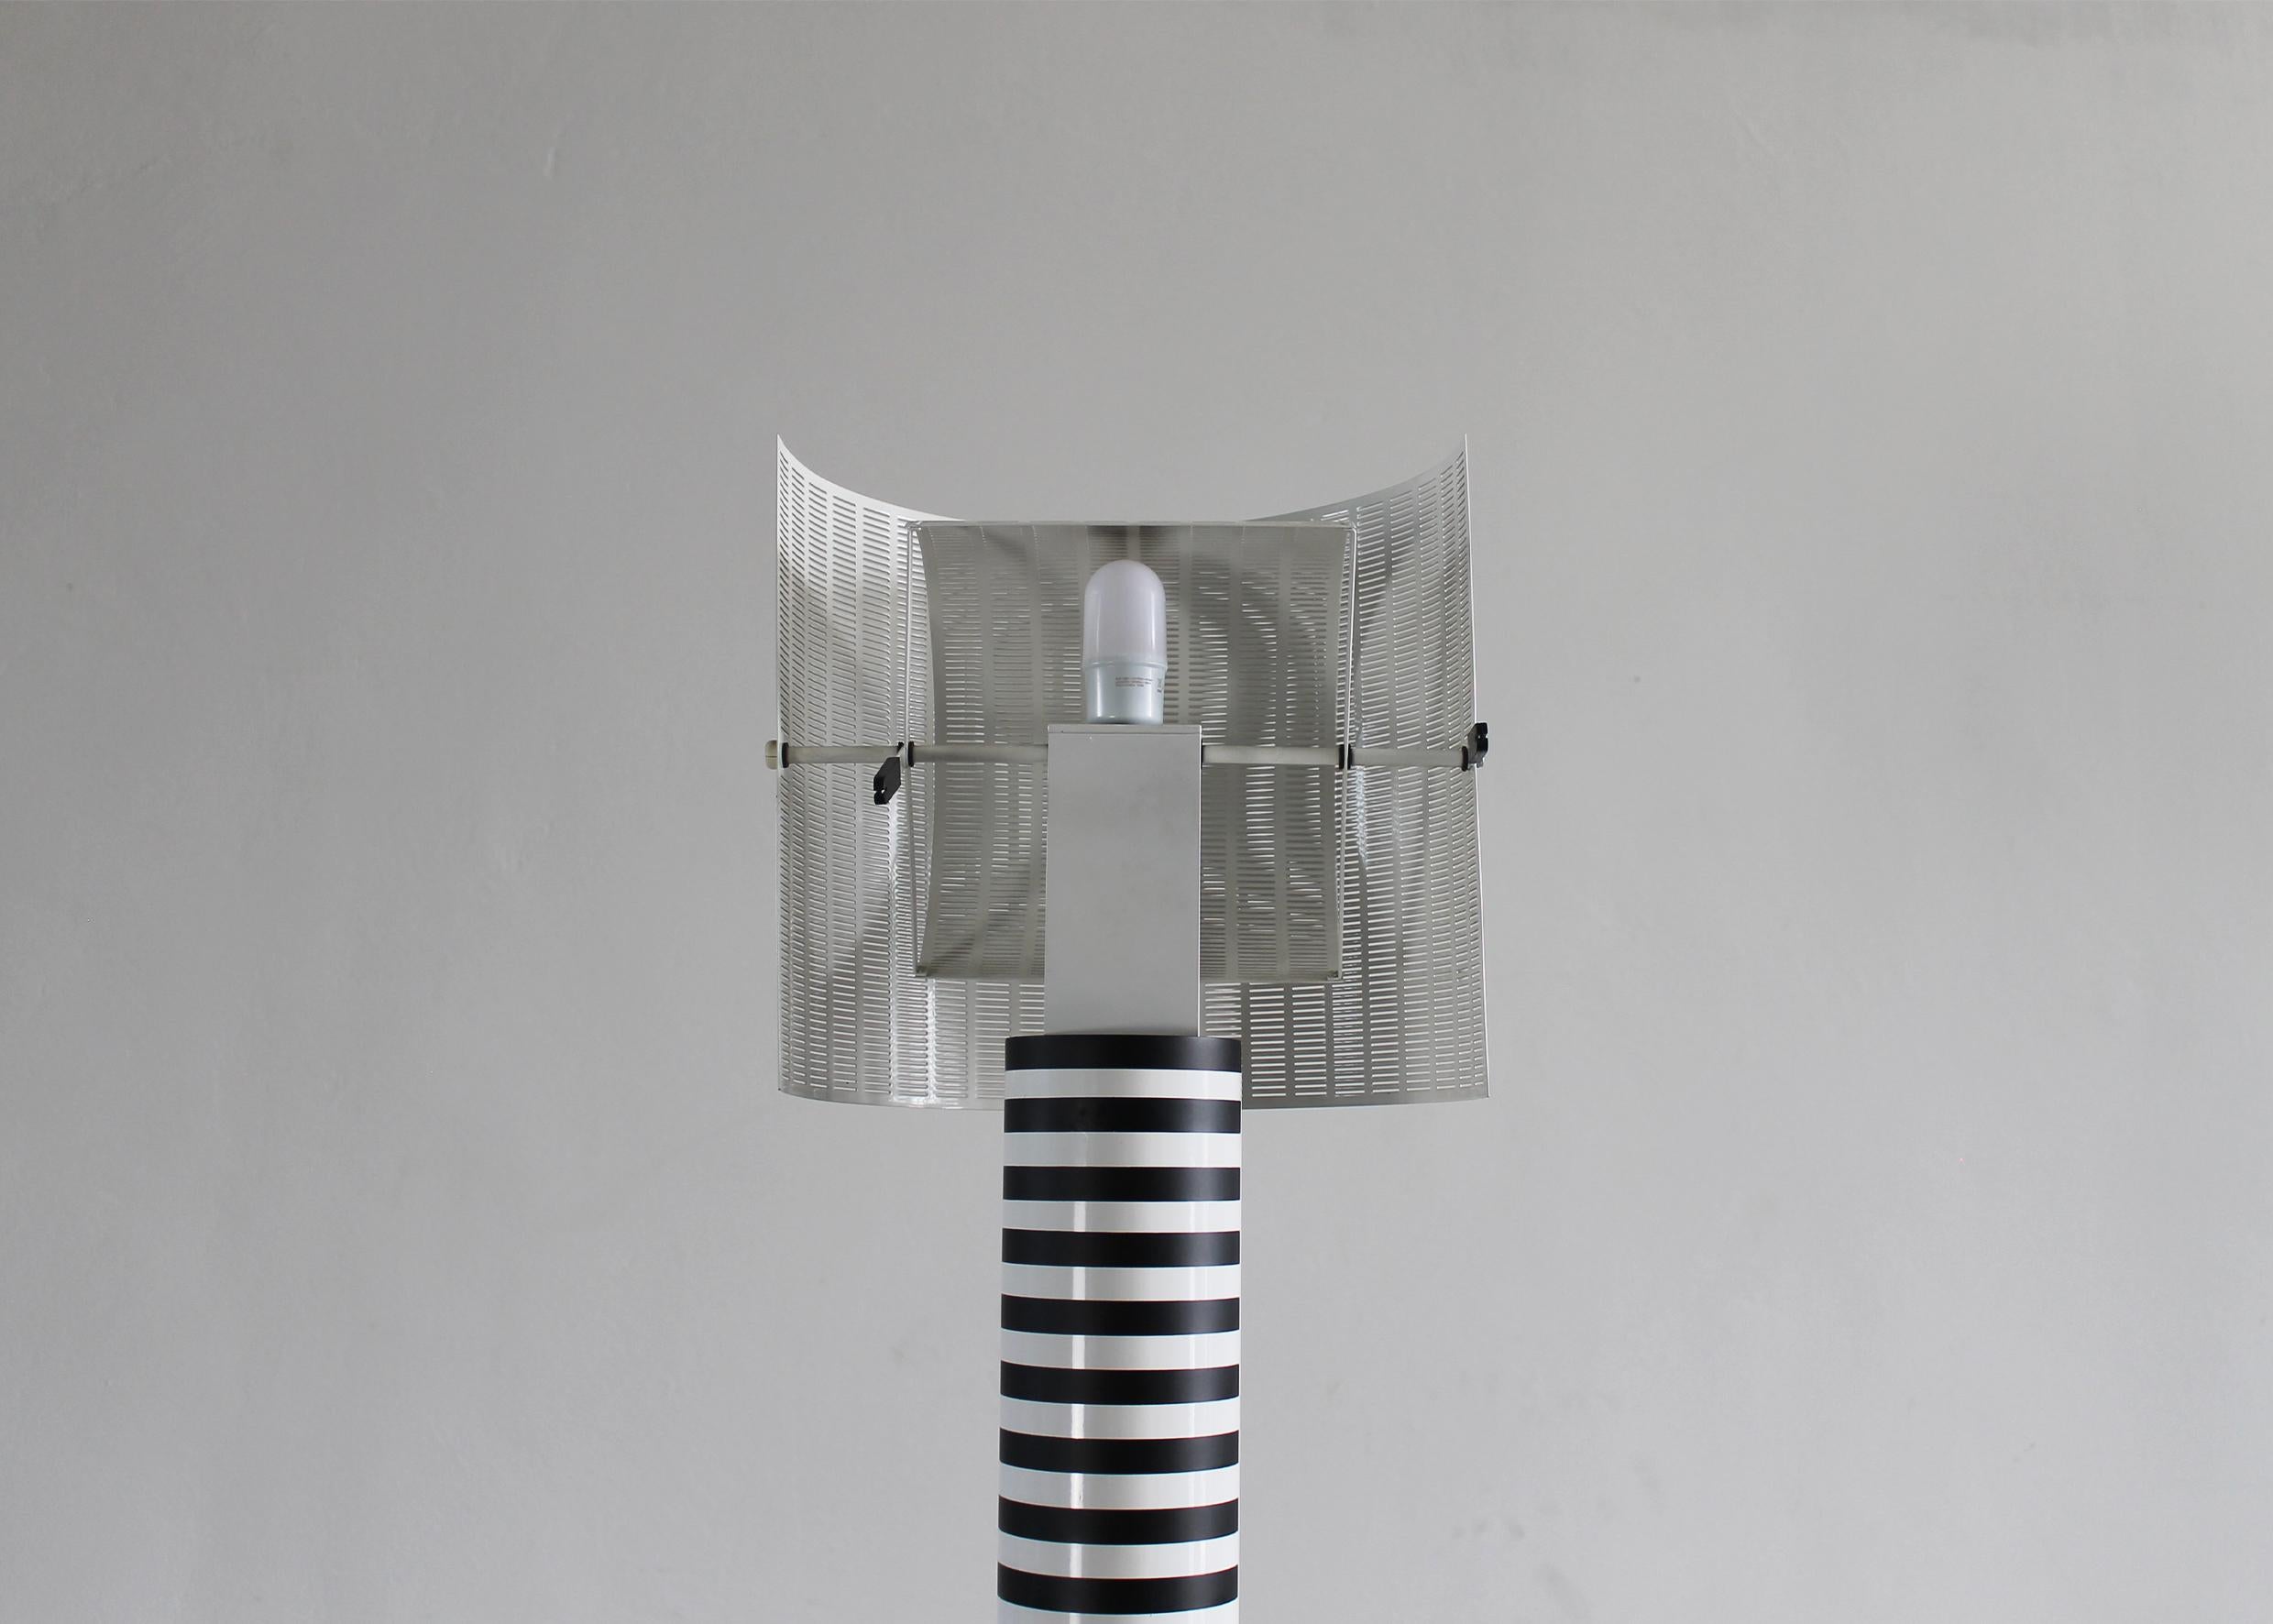 Lacquered Mario Botta Shogun Floor Lamp in Black and White Metal by Artemide 1986 Italy For Sale